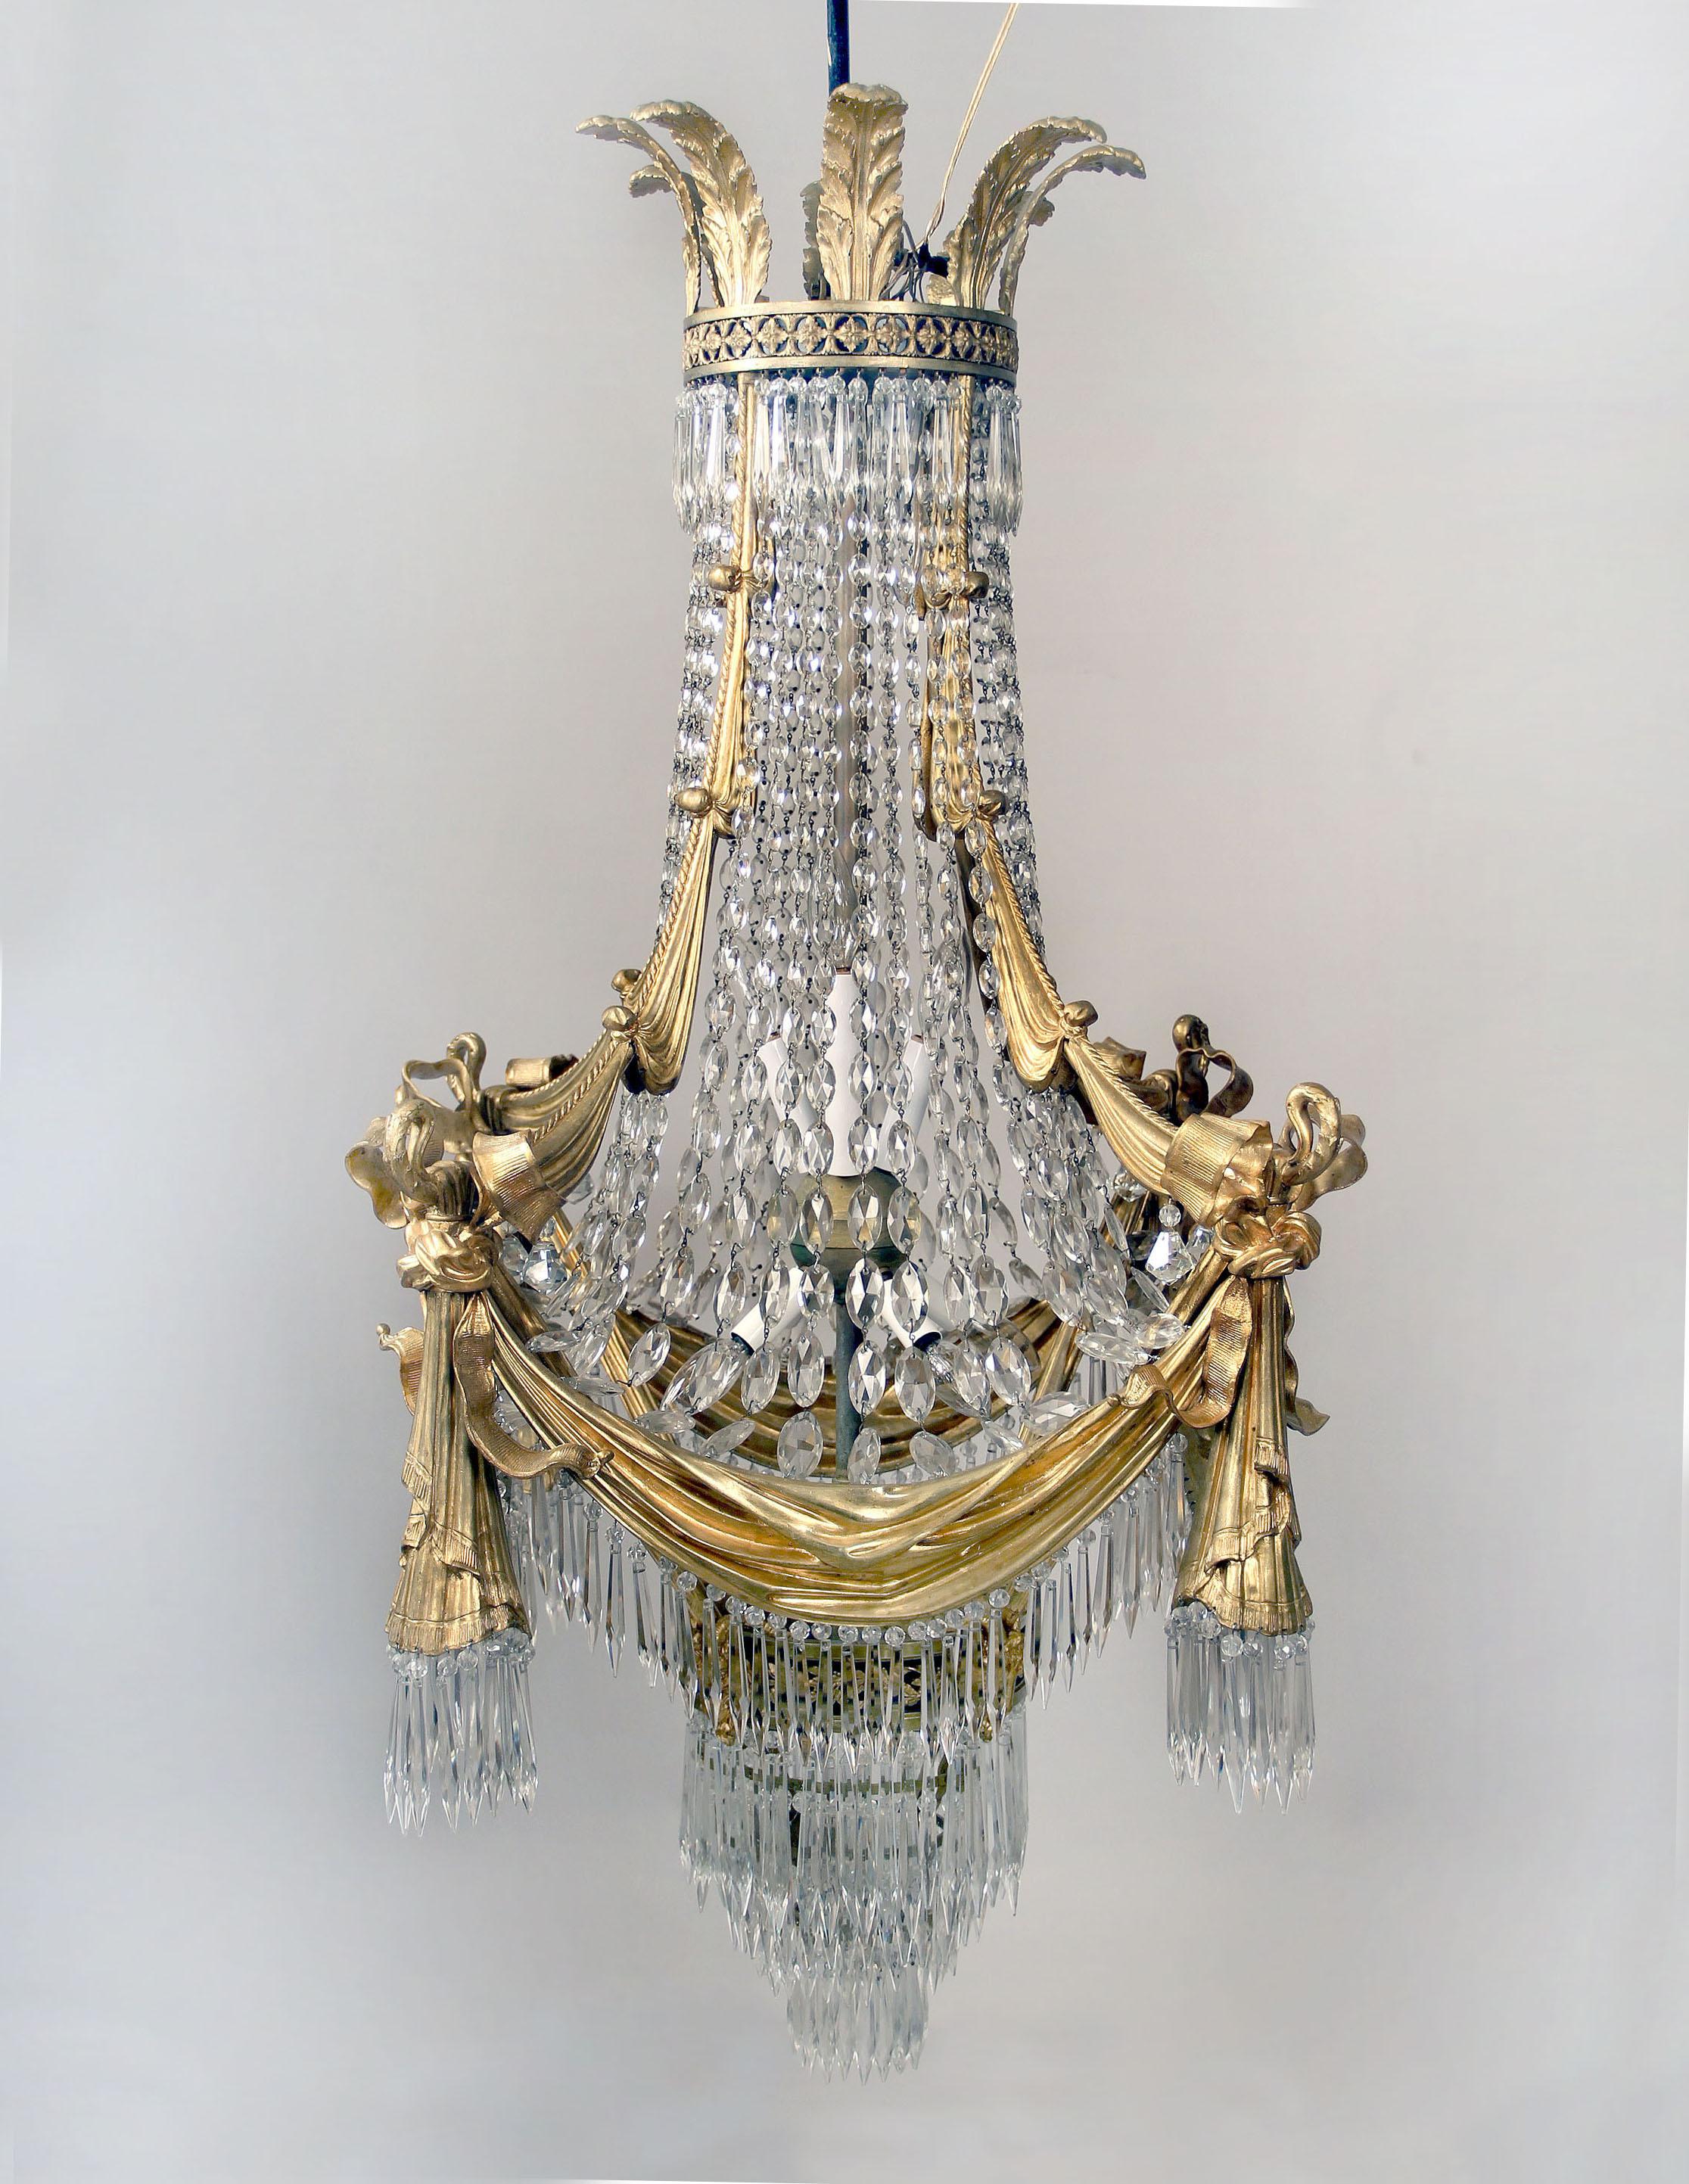 A stunning late 19th century gilt bronze and drop crystal fifteen-light chandelier

Great quality gilt bronze frame designed with curtains and bows, the crown with plumes and the base with four ram heads. Beaded crystal body with layers of drop